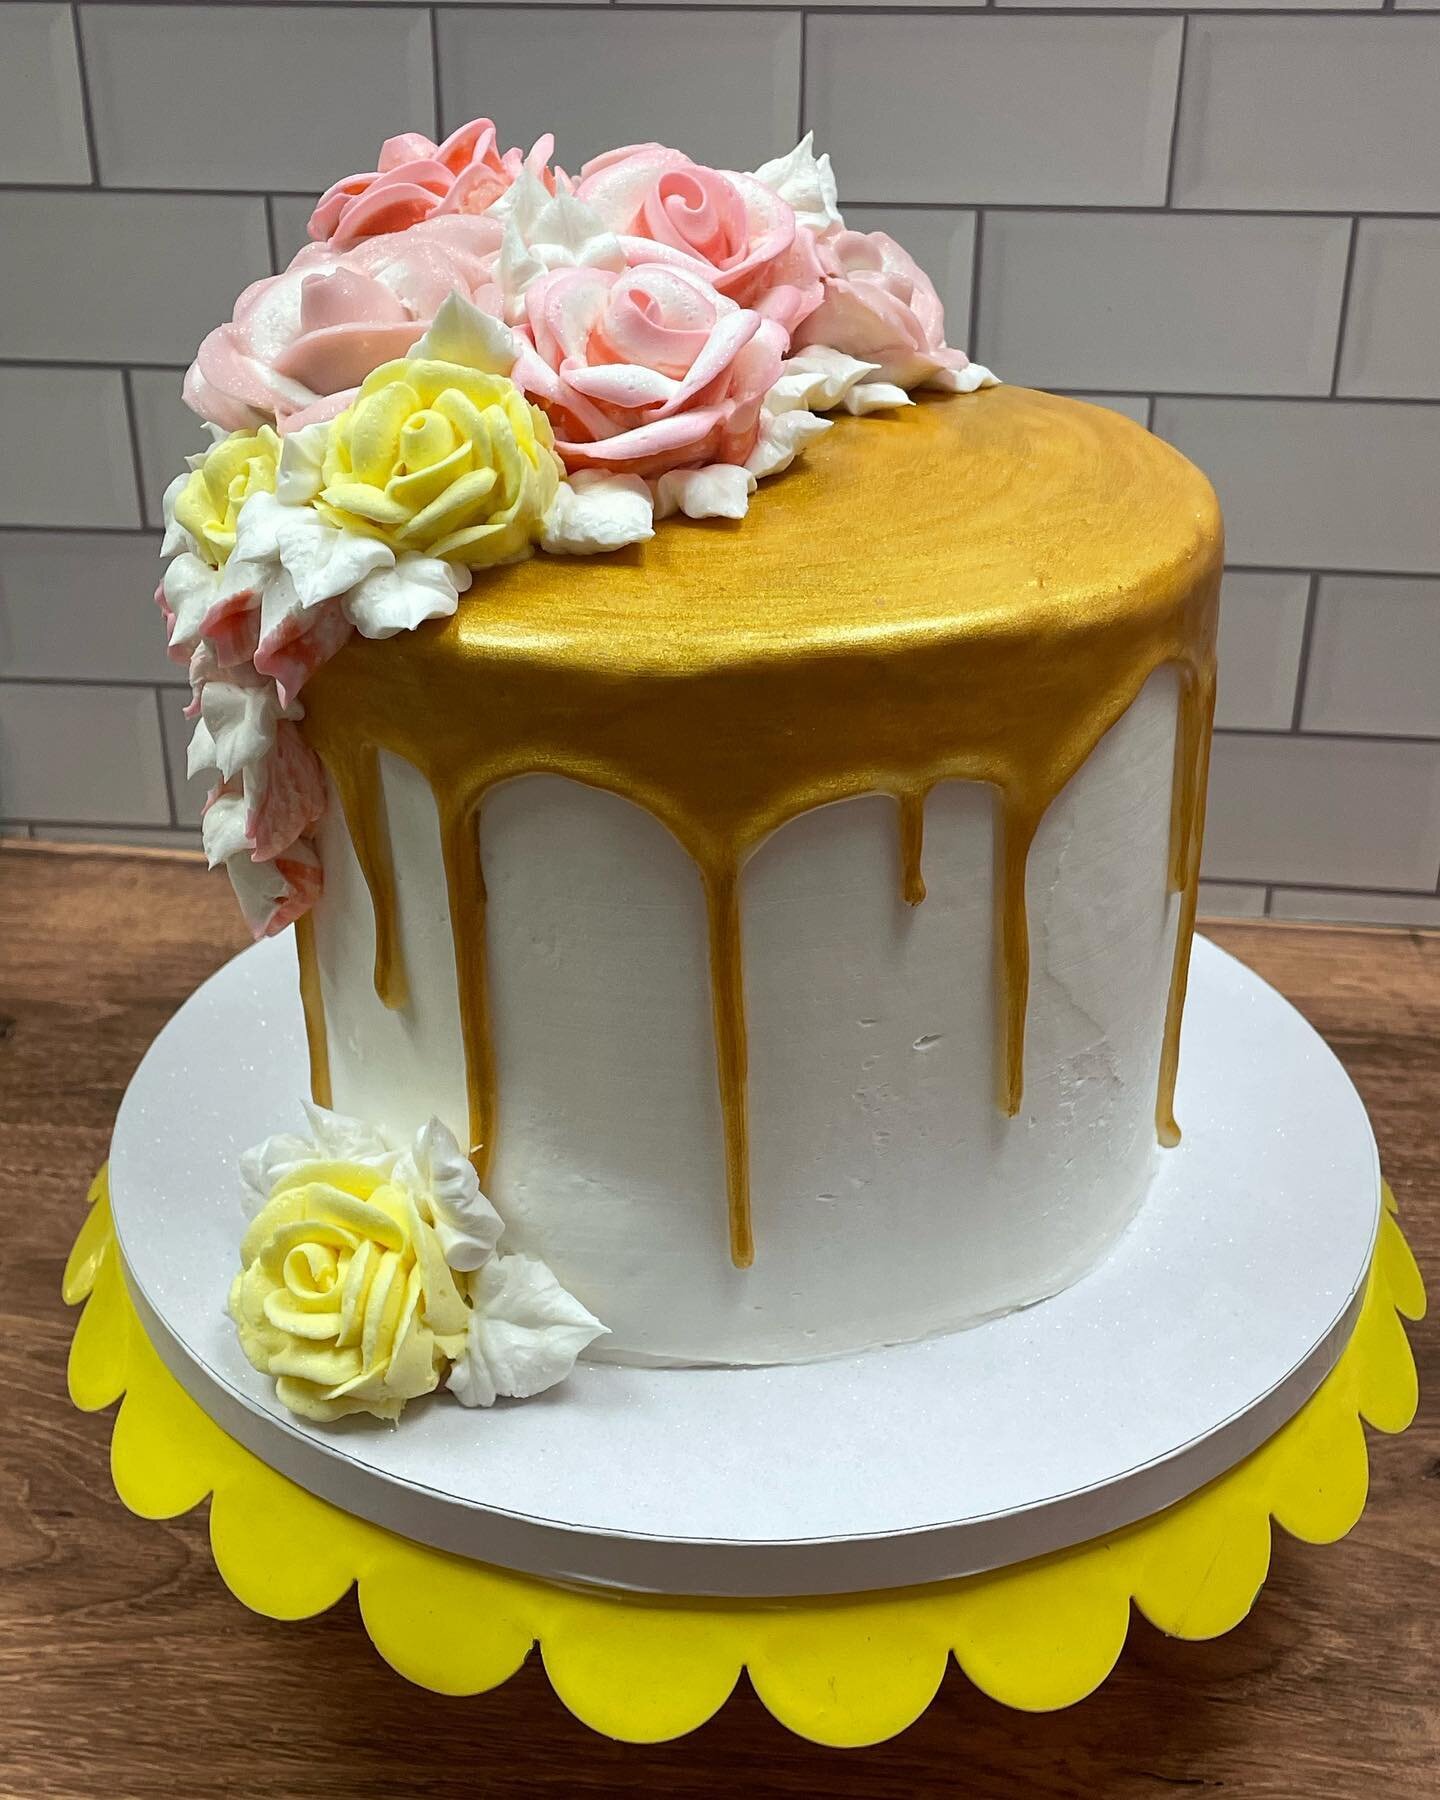 Gold drip 3 layer 6 inch cake with buttercream flowers #downtownkennesaw